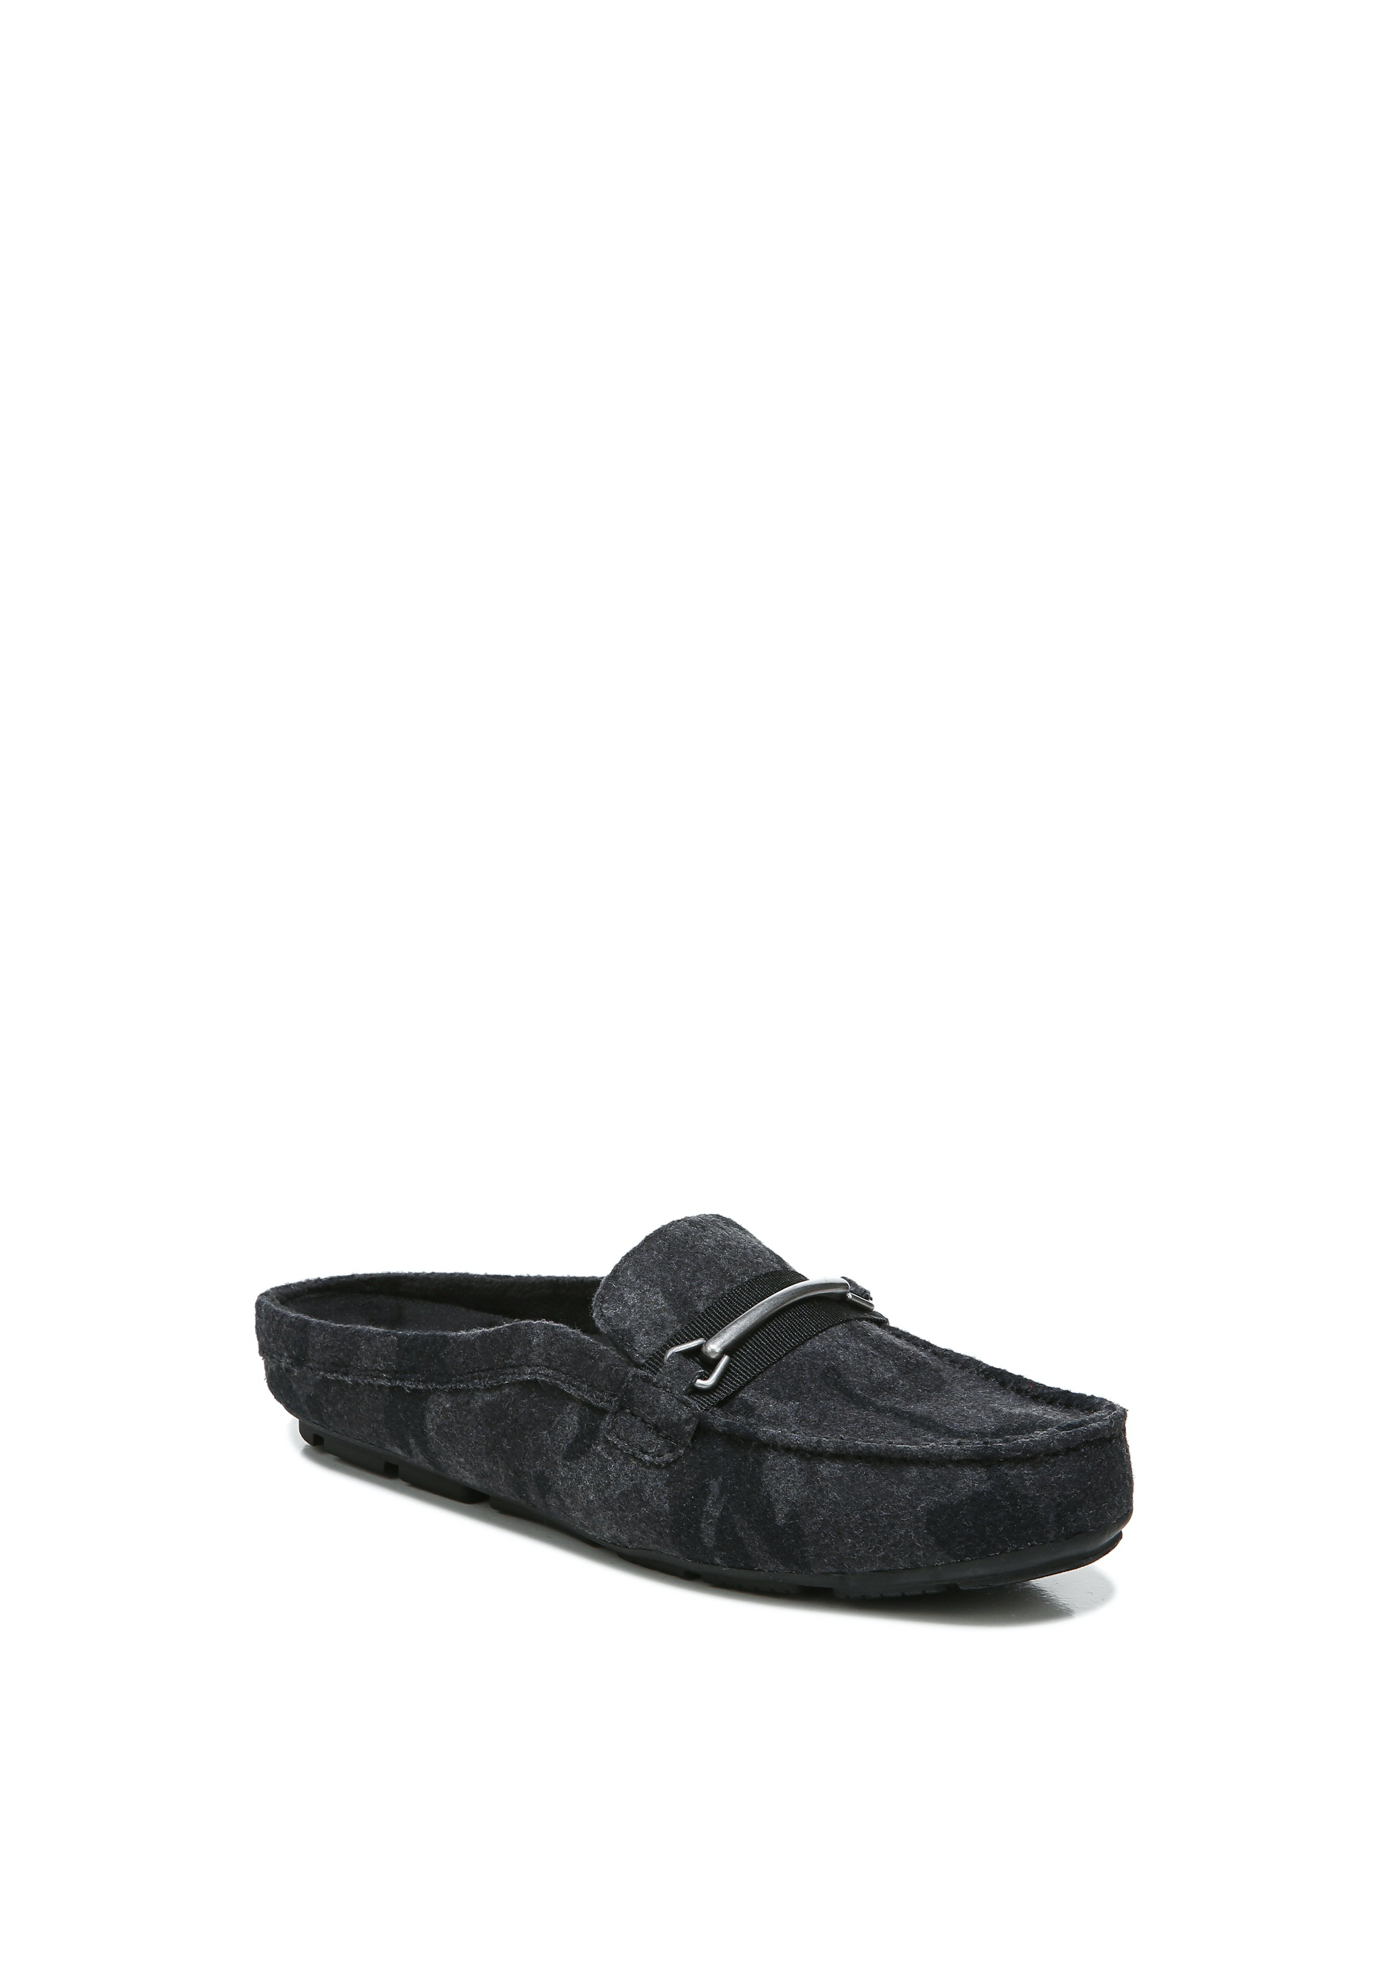 Style Fur Lined Loafer Mule, 